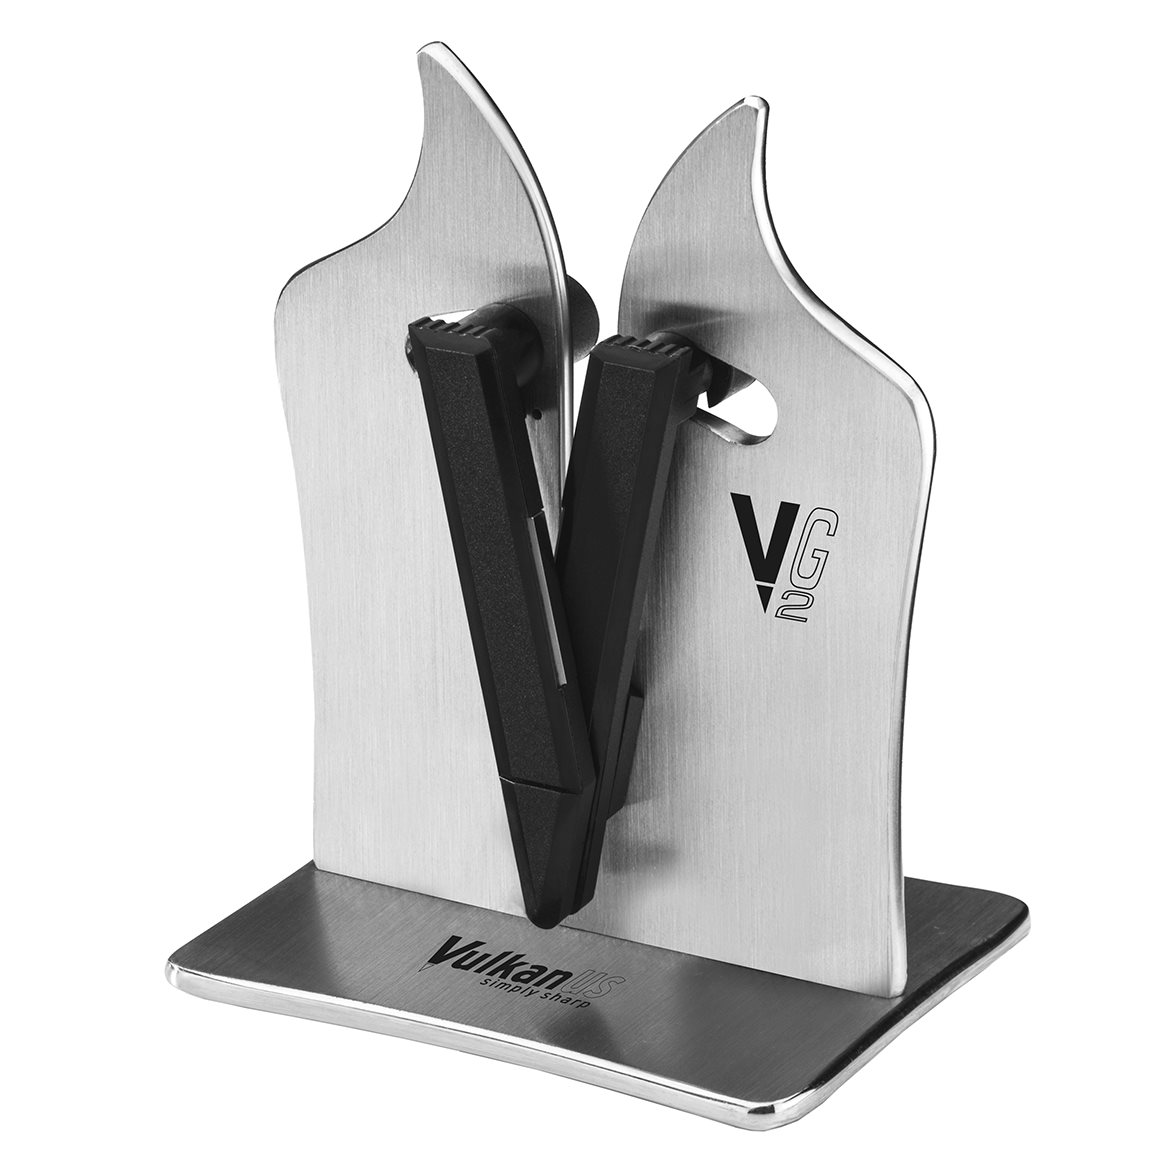 The Best Knife Sharpeners for Hunting - Petersen's Hunting